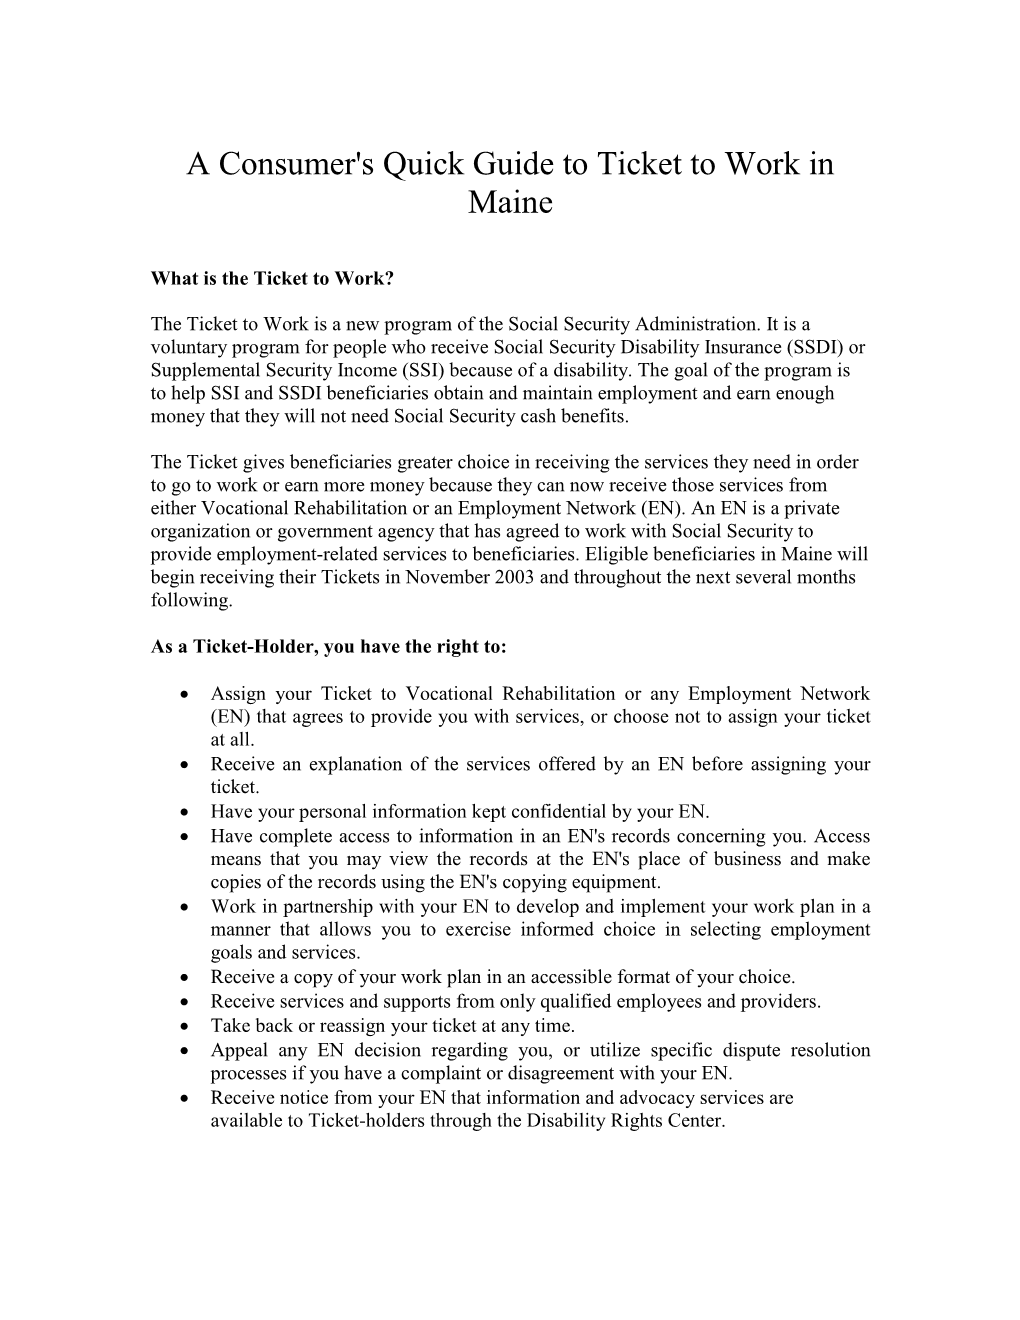 A Consumer's Guide to Ticket to Work Inmaine